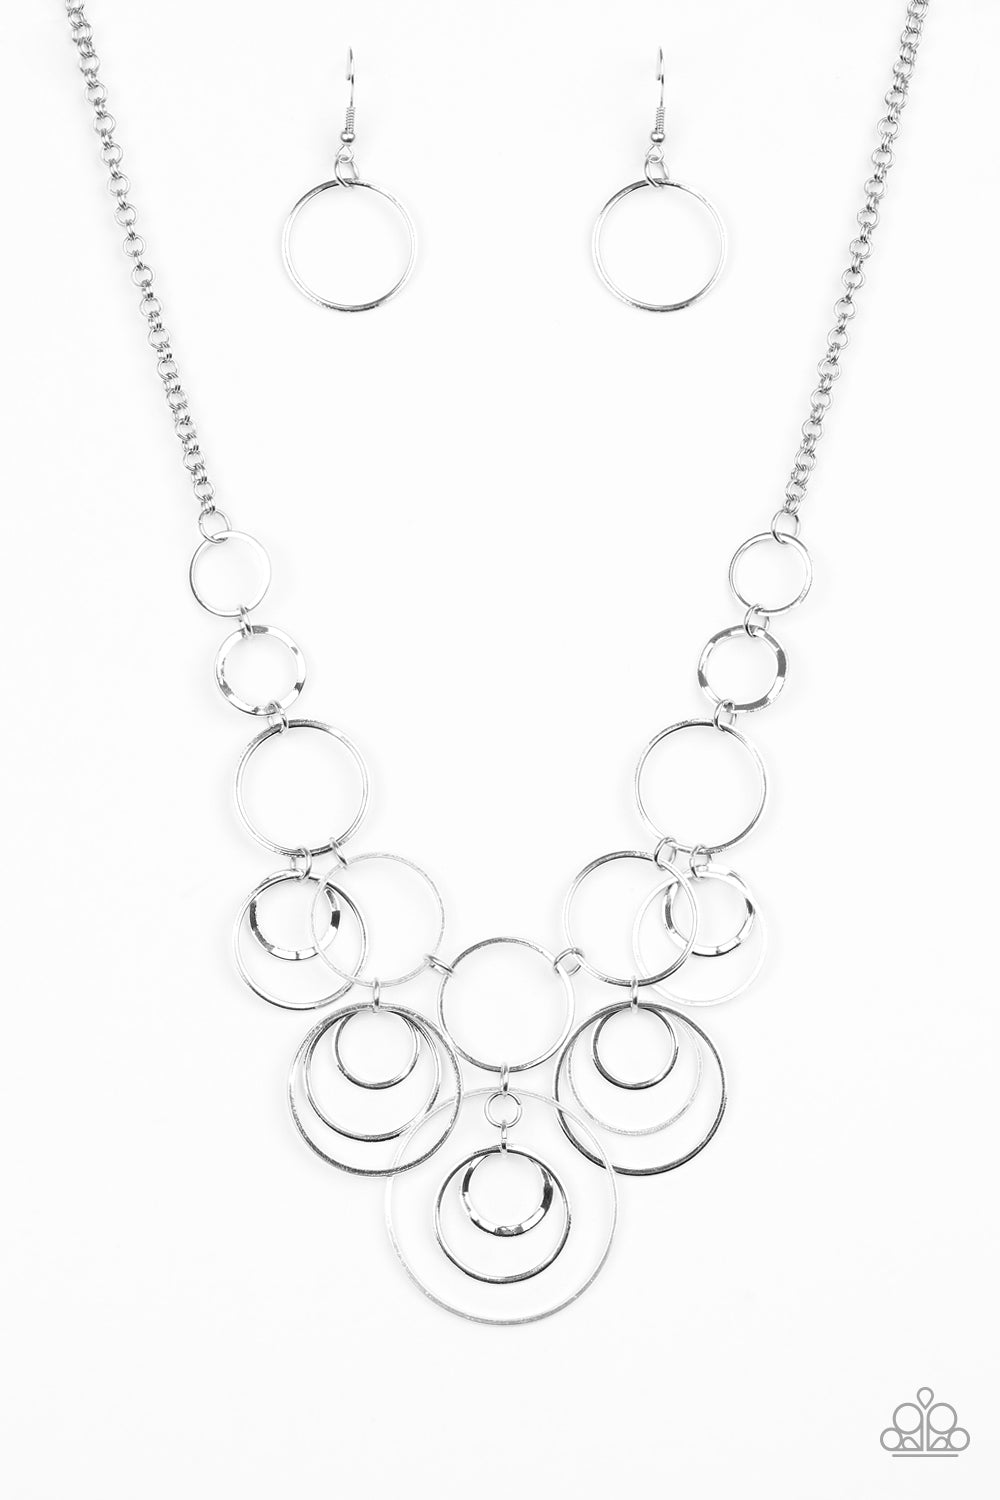 Break The Cycle - Silver Item #N728 Featuring smooth and delicately hammered finishes, mismatched silver hoops connect below the collar for a bold industrial look. Features an adjustable clasp closure. All Paparazzi Accessories are lead free and nickel free!  Sold as one individual necklace. Includes one pair of matching earrings.